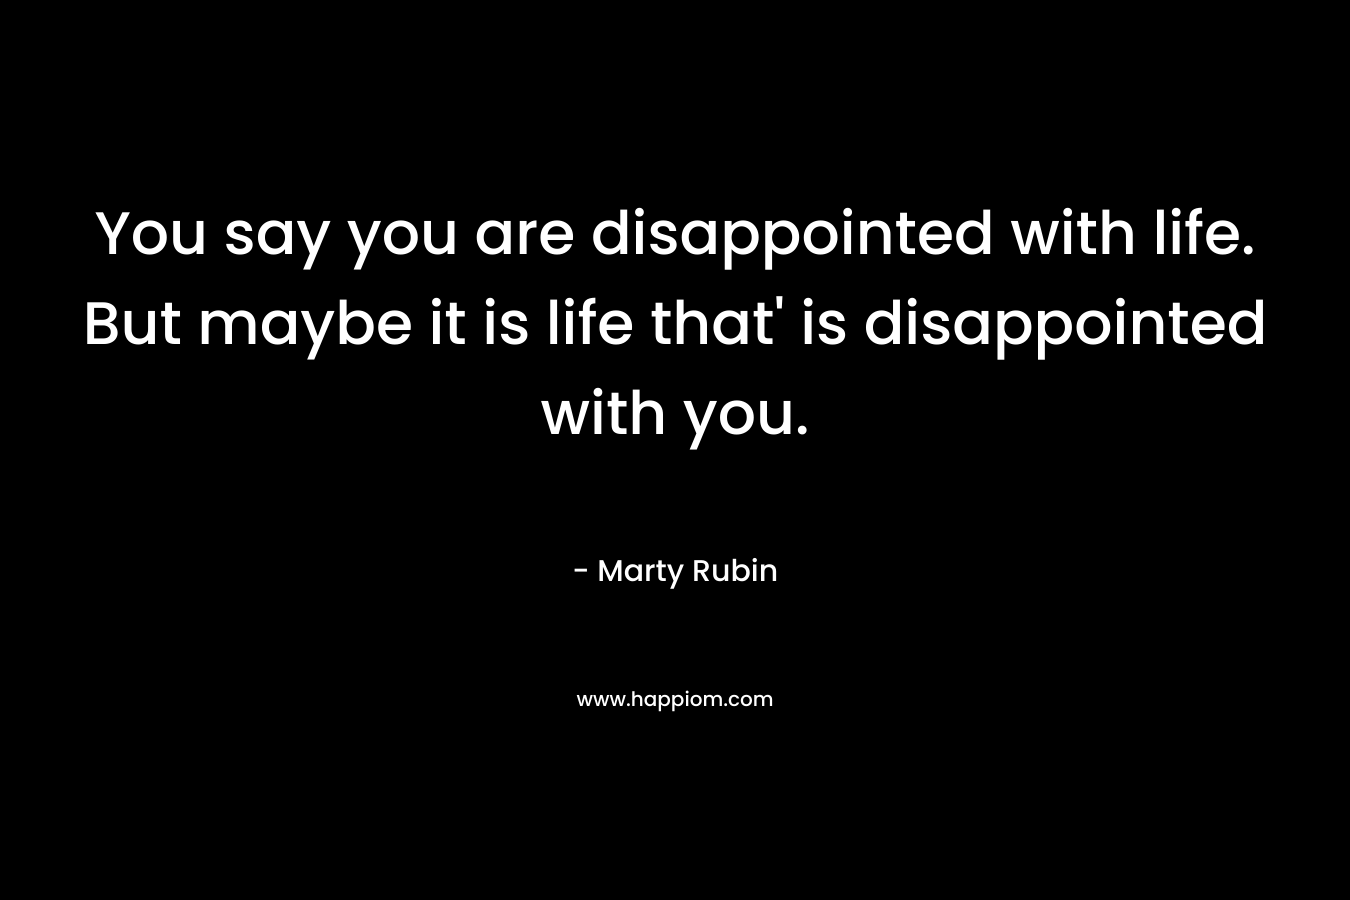 You say you are disappointed with life. But maybe it is life that' is disappointed with you.